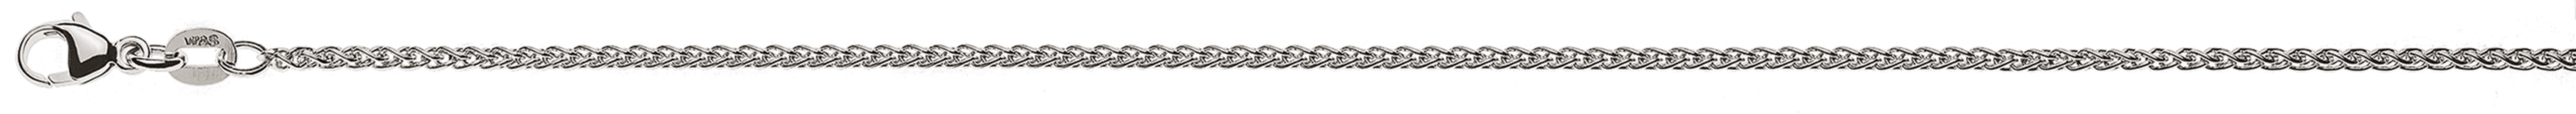 AURONOS Style Necklace white gold 9K cable chain 38cm 1.65mm